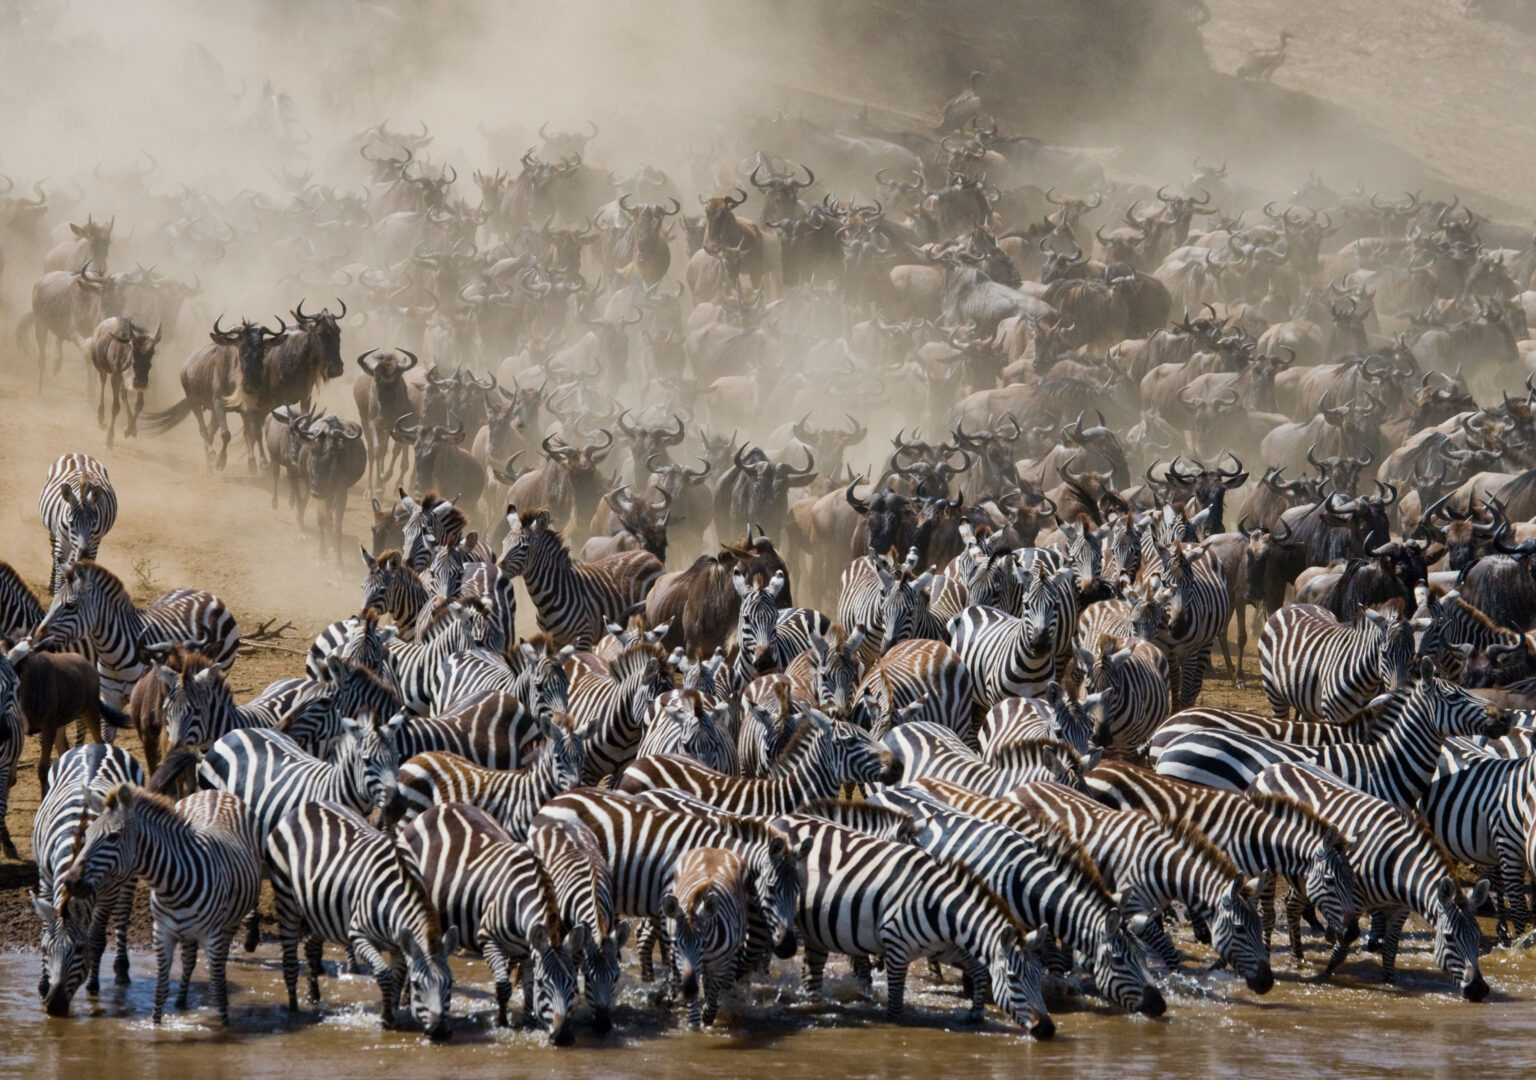 a large herd of zebras and wildebeests in the water.